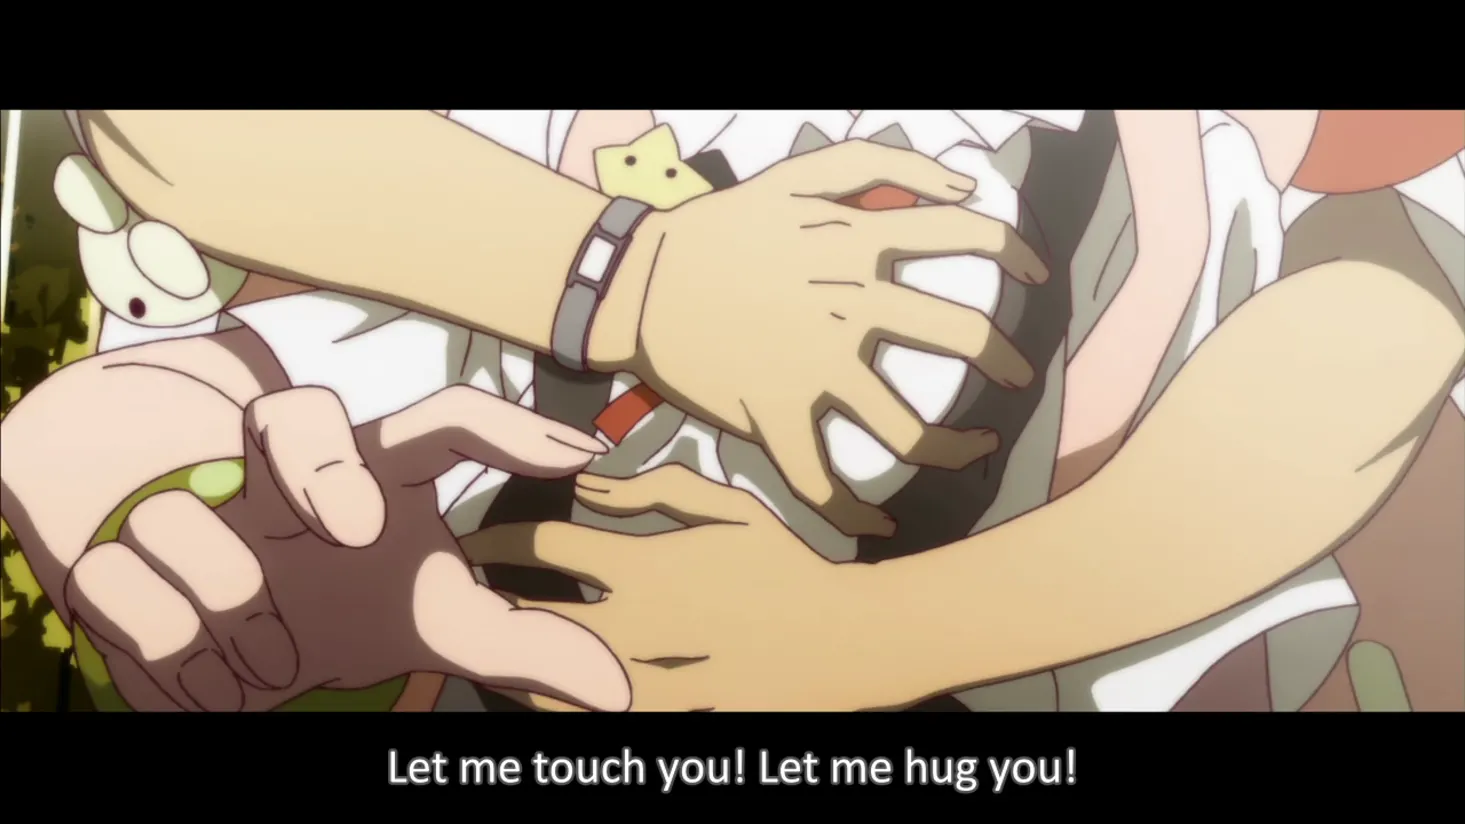 Let’s face it, Bakemonogatari. You portray your main character as a sex offender. Are we meant to empathise with this?